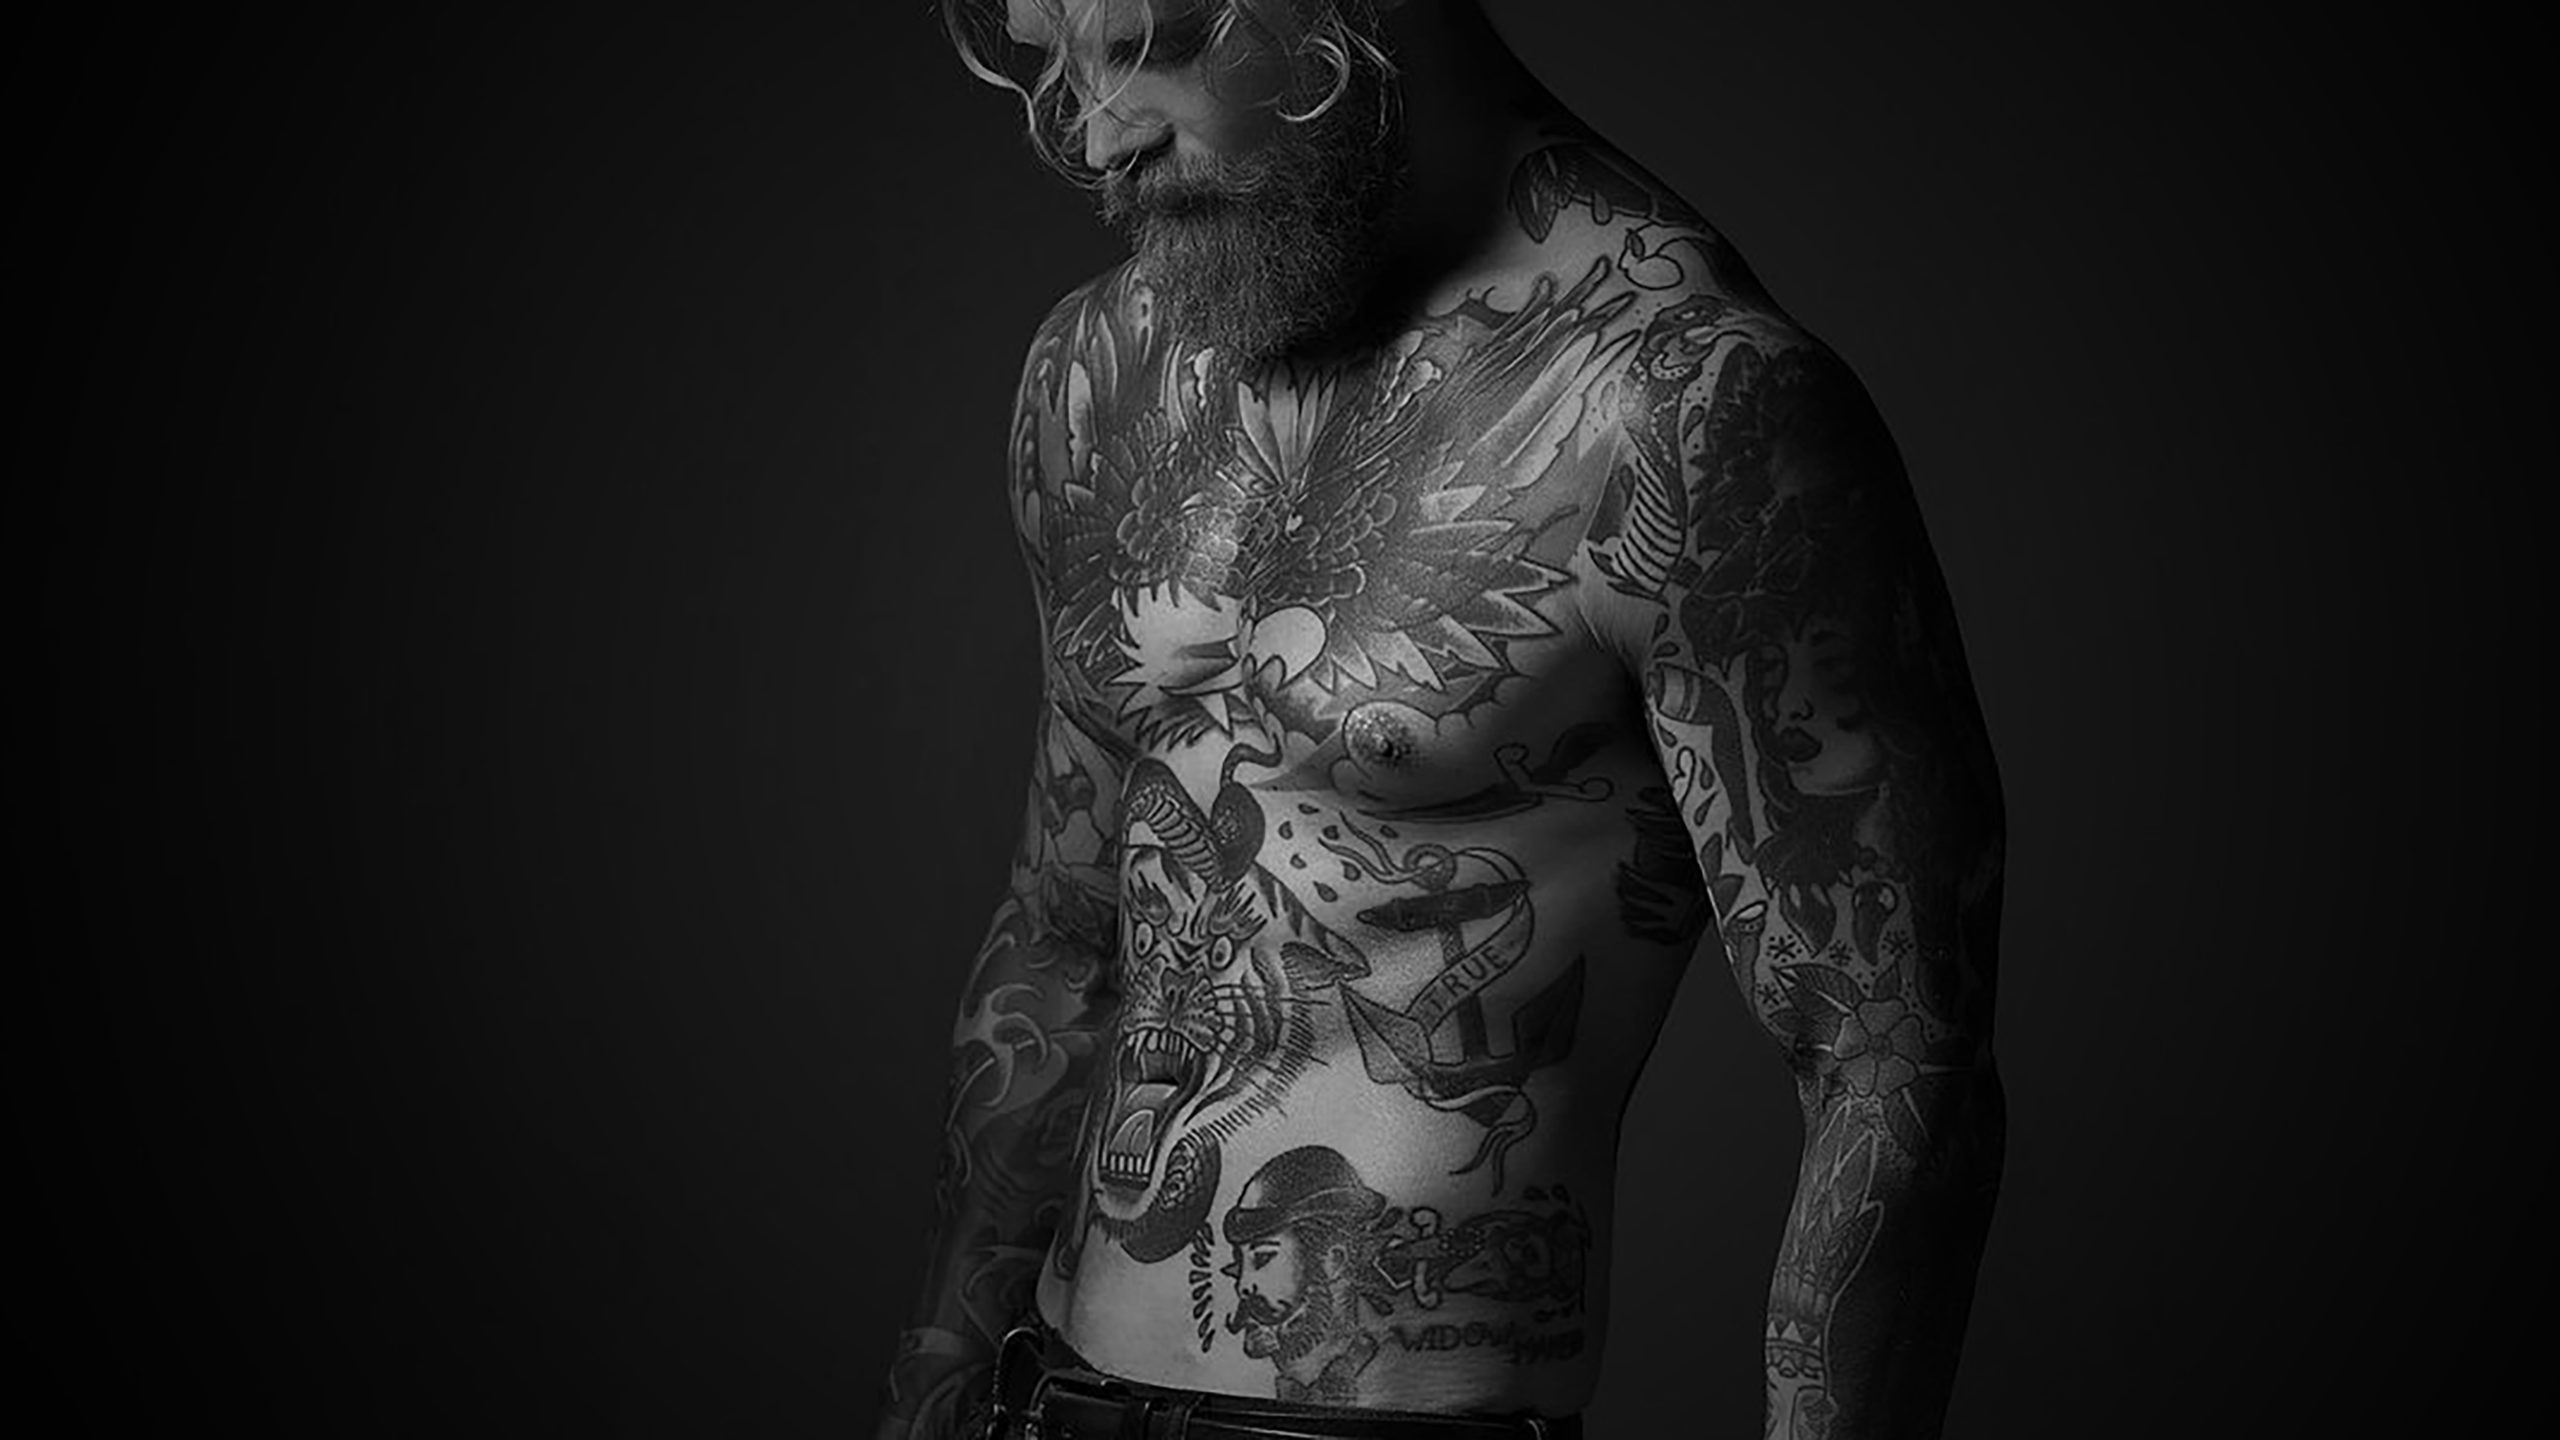 A man with tattoos on his body considering laser tattoo removal.